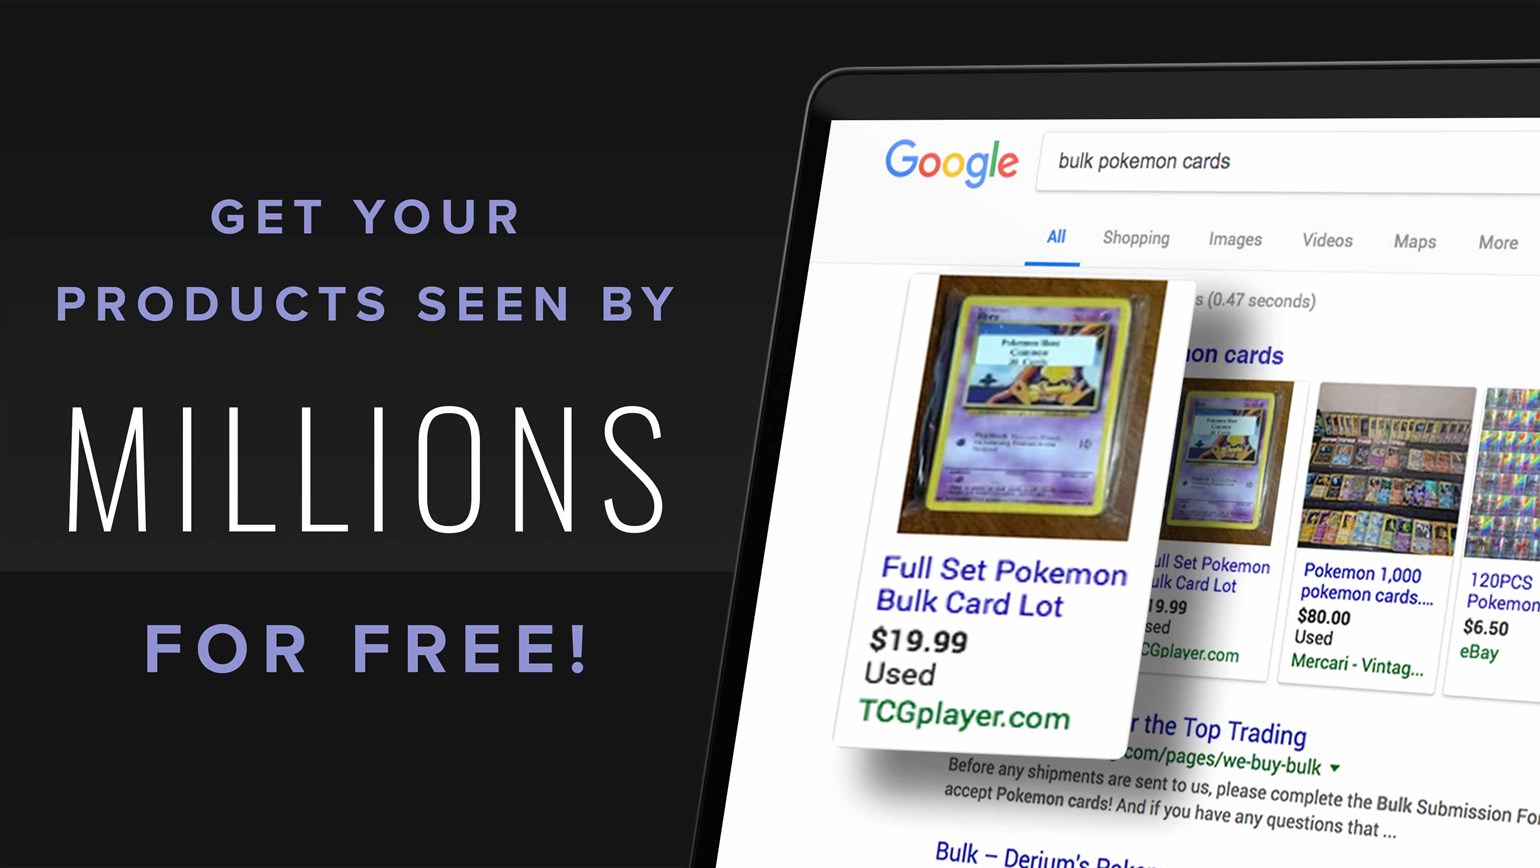 Get Your Products Seen by Millions (for Free!)